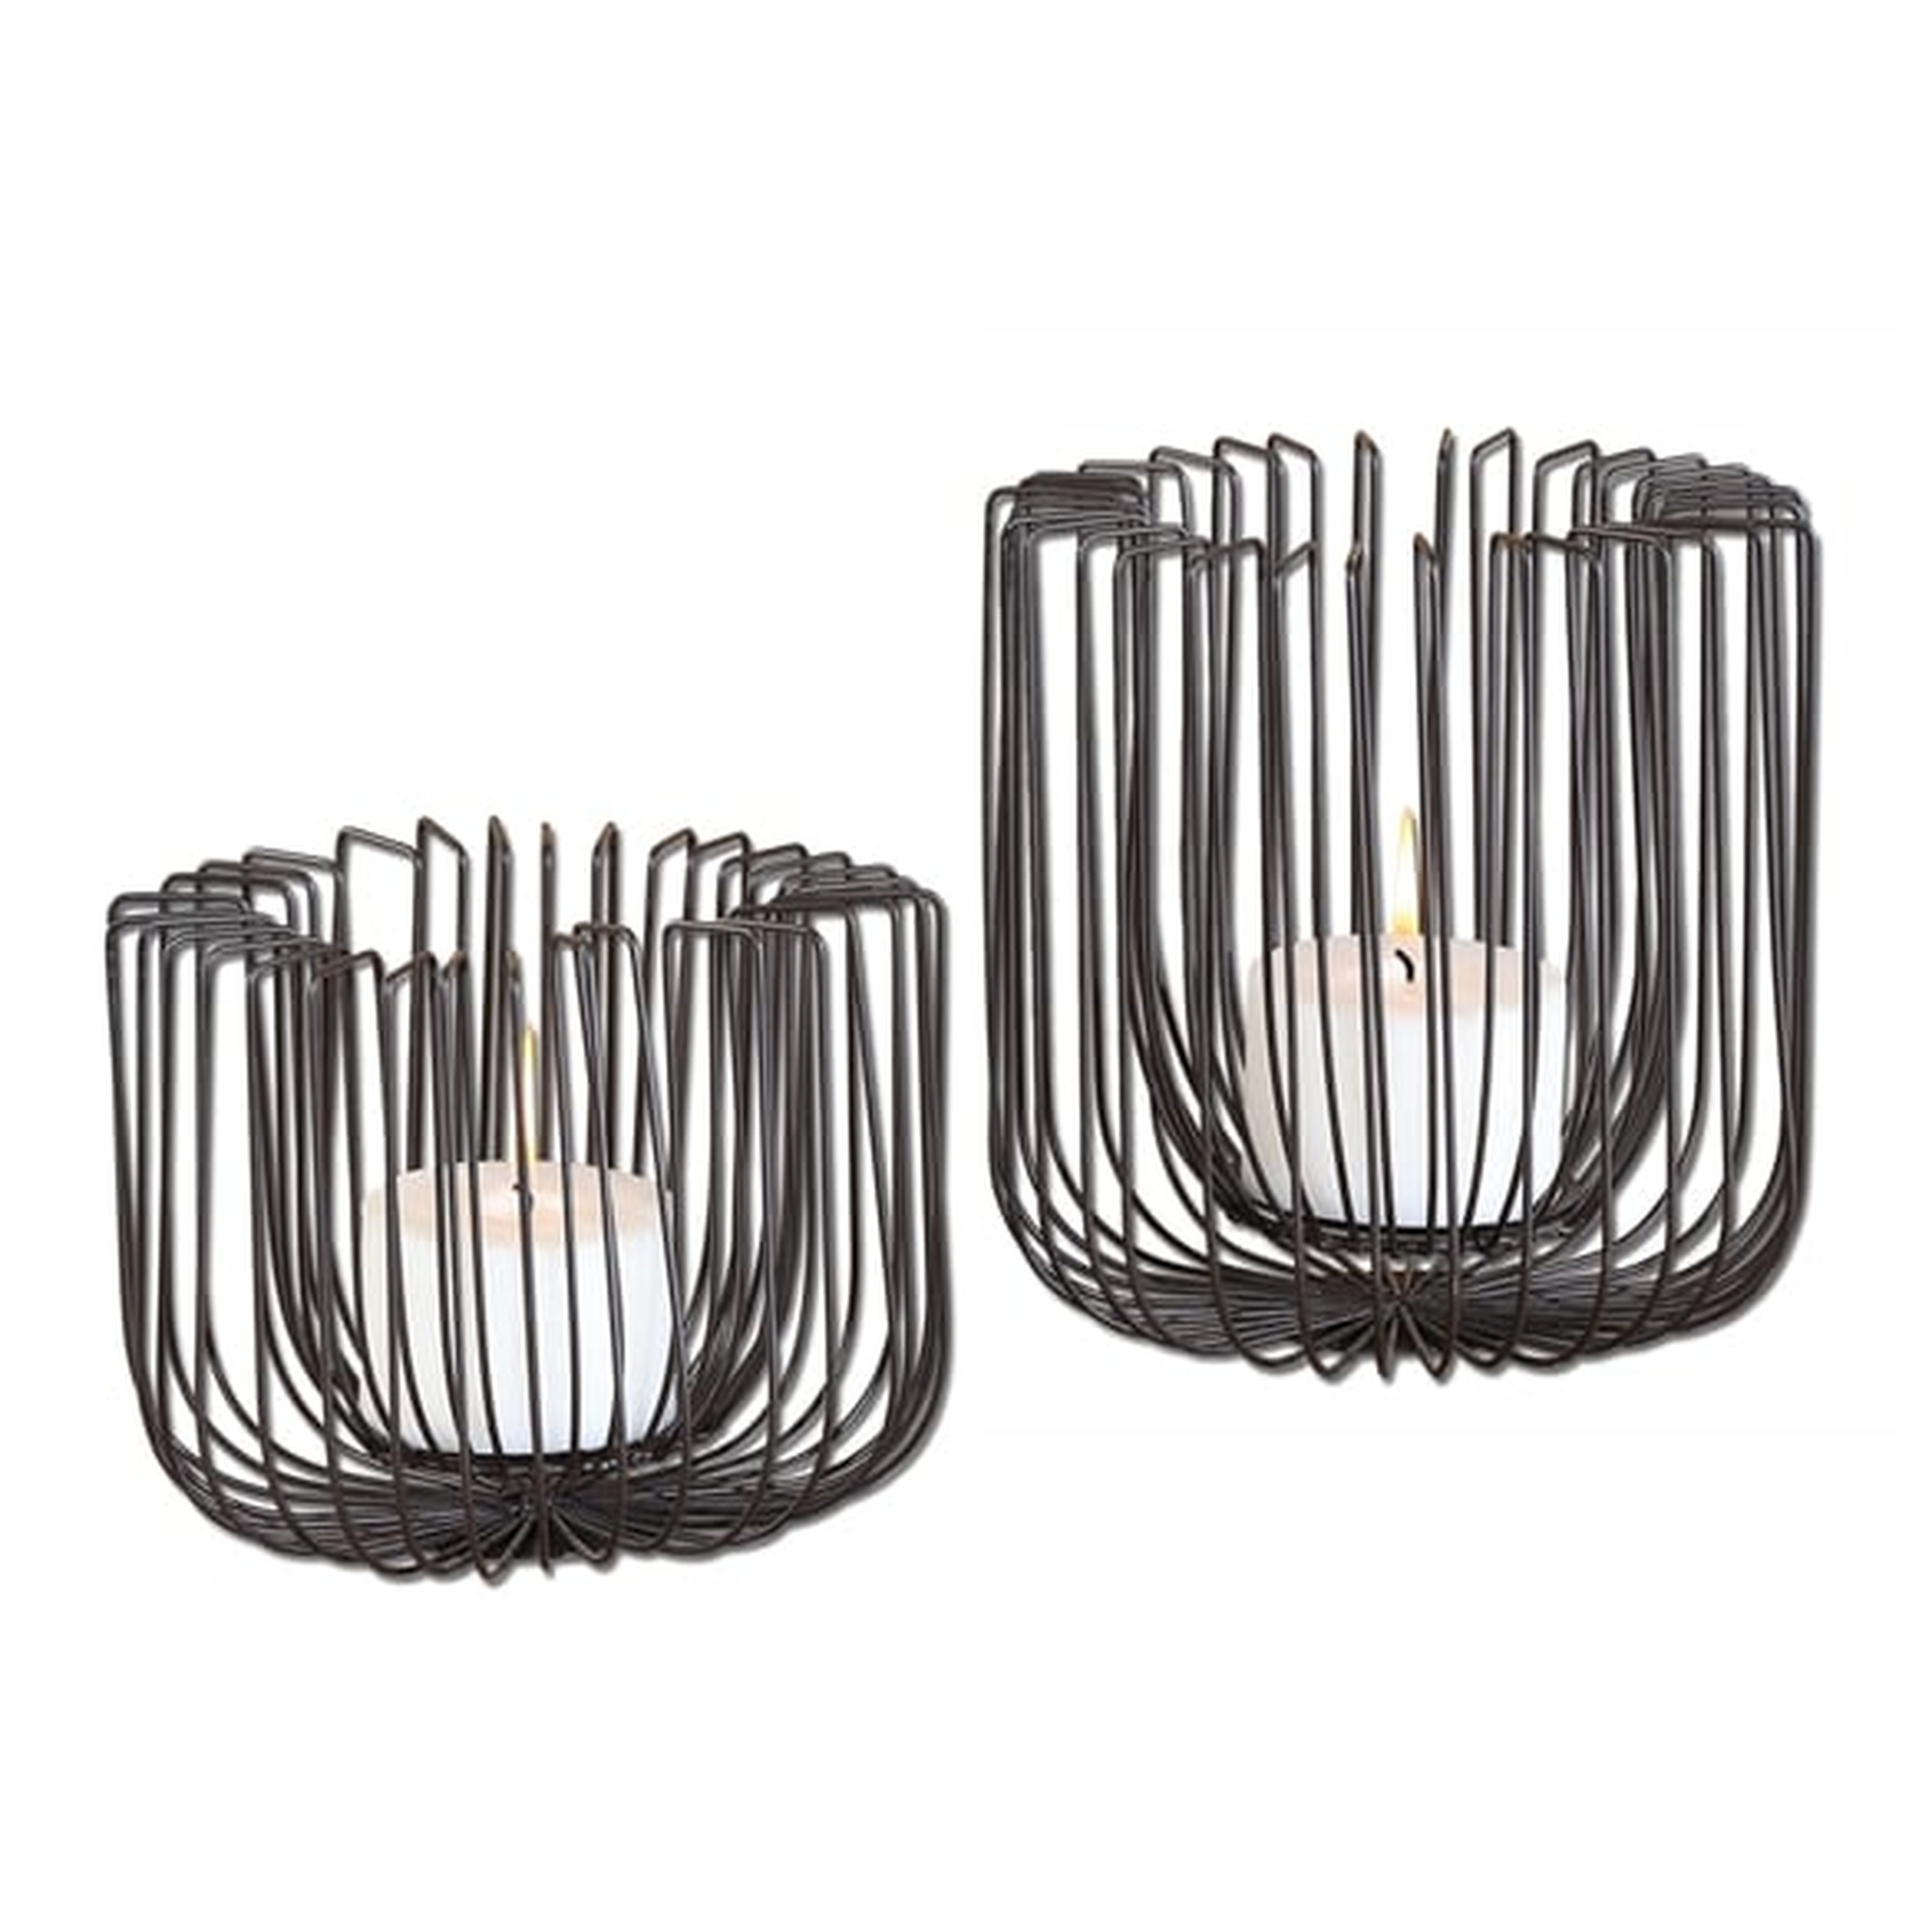 Flare, Candleholders, S/2 - Hudsonhill Foundry